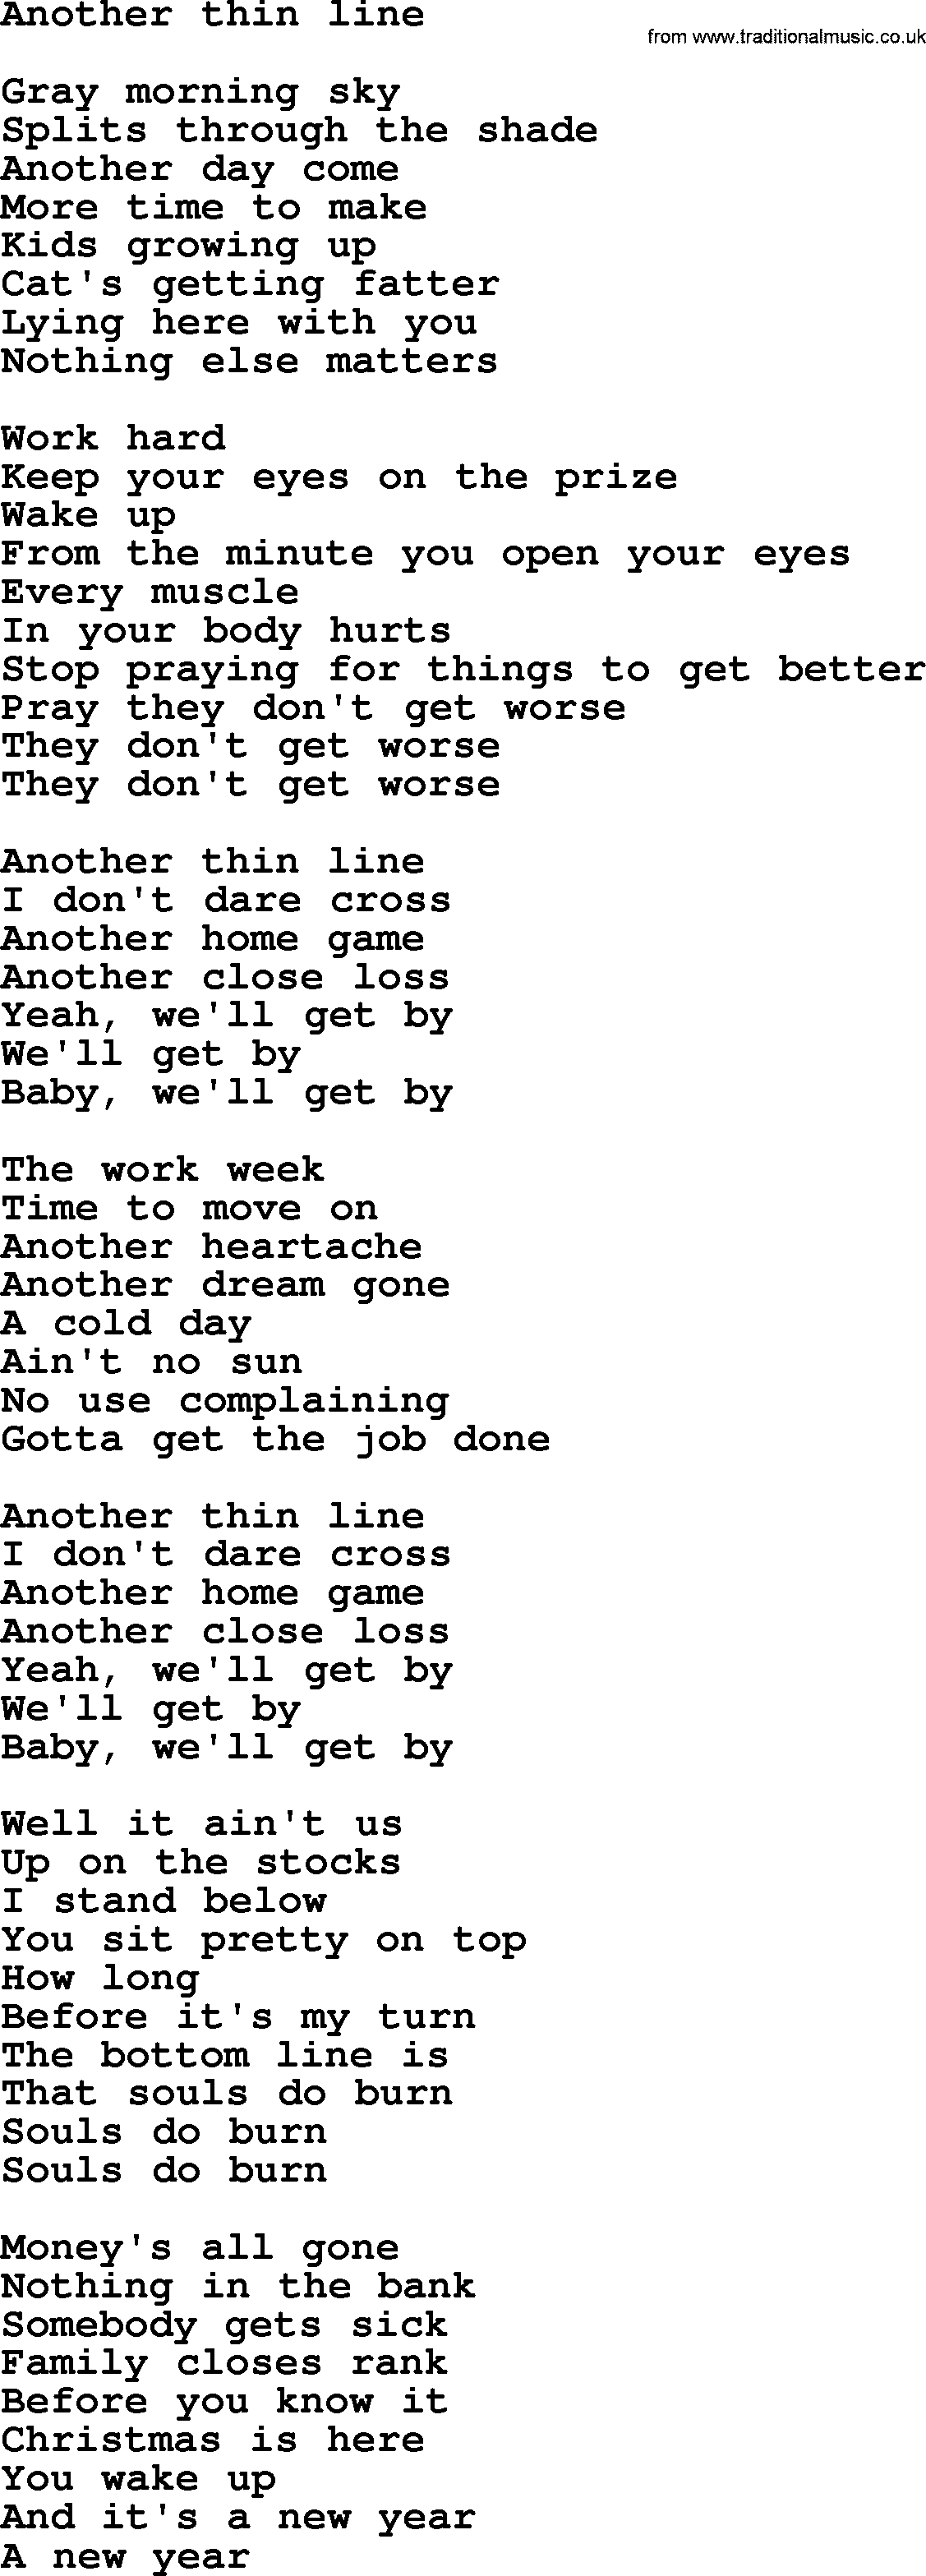 Bruce Springsteen song: Another Thin Line lyrics